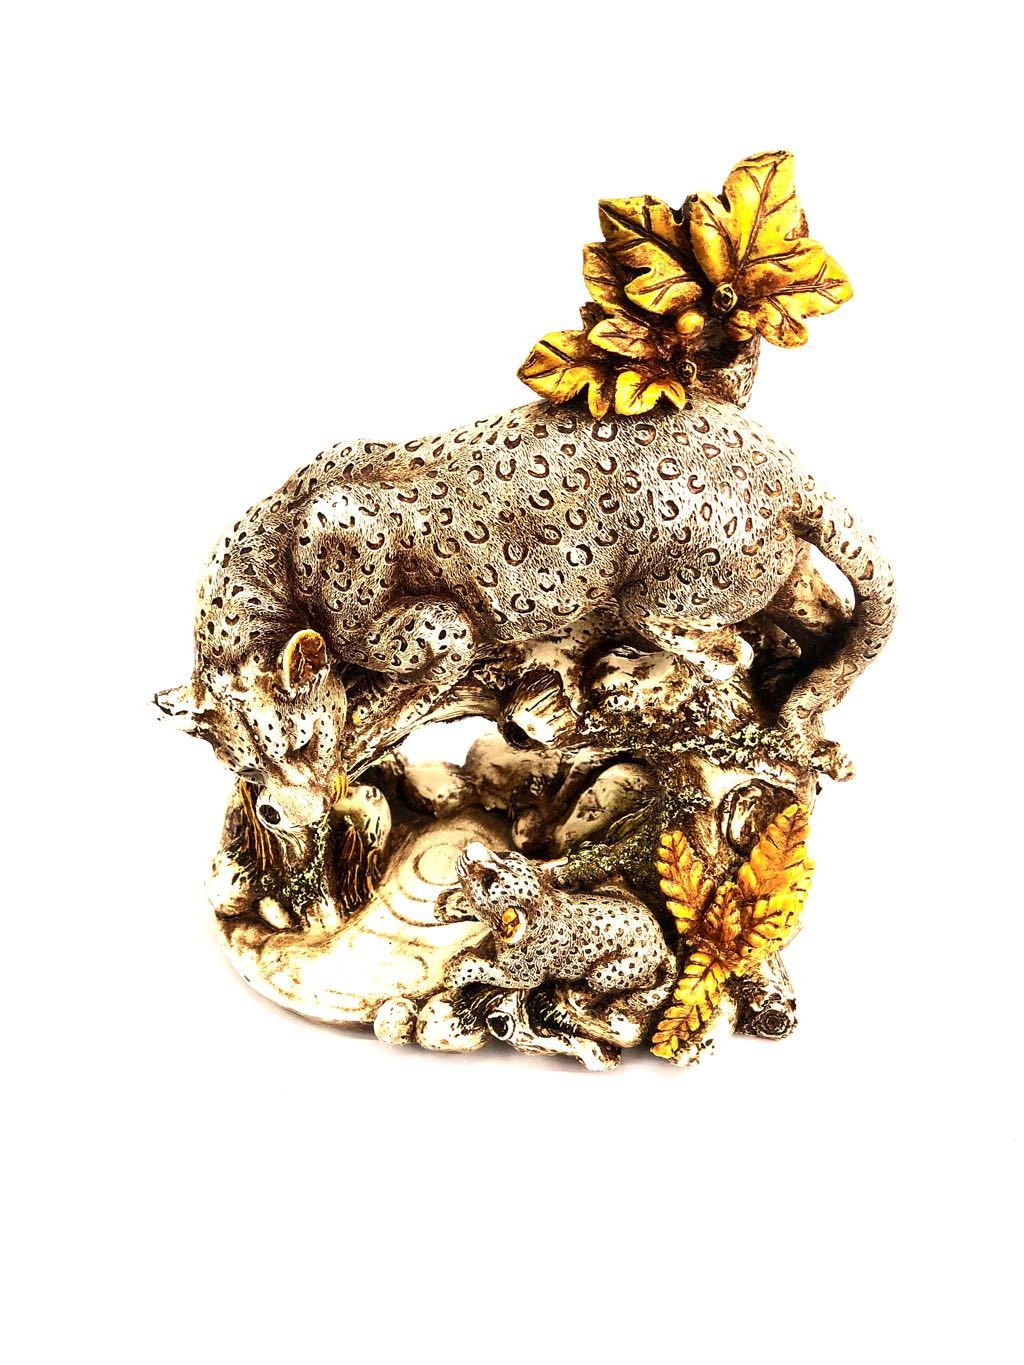 Leopard With Cub Sweet Memorable Resin Art Showpiece Tamrapatra